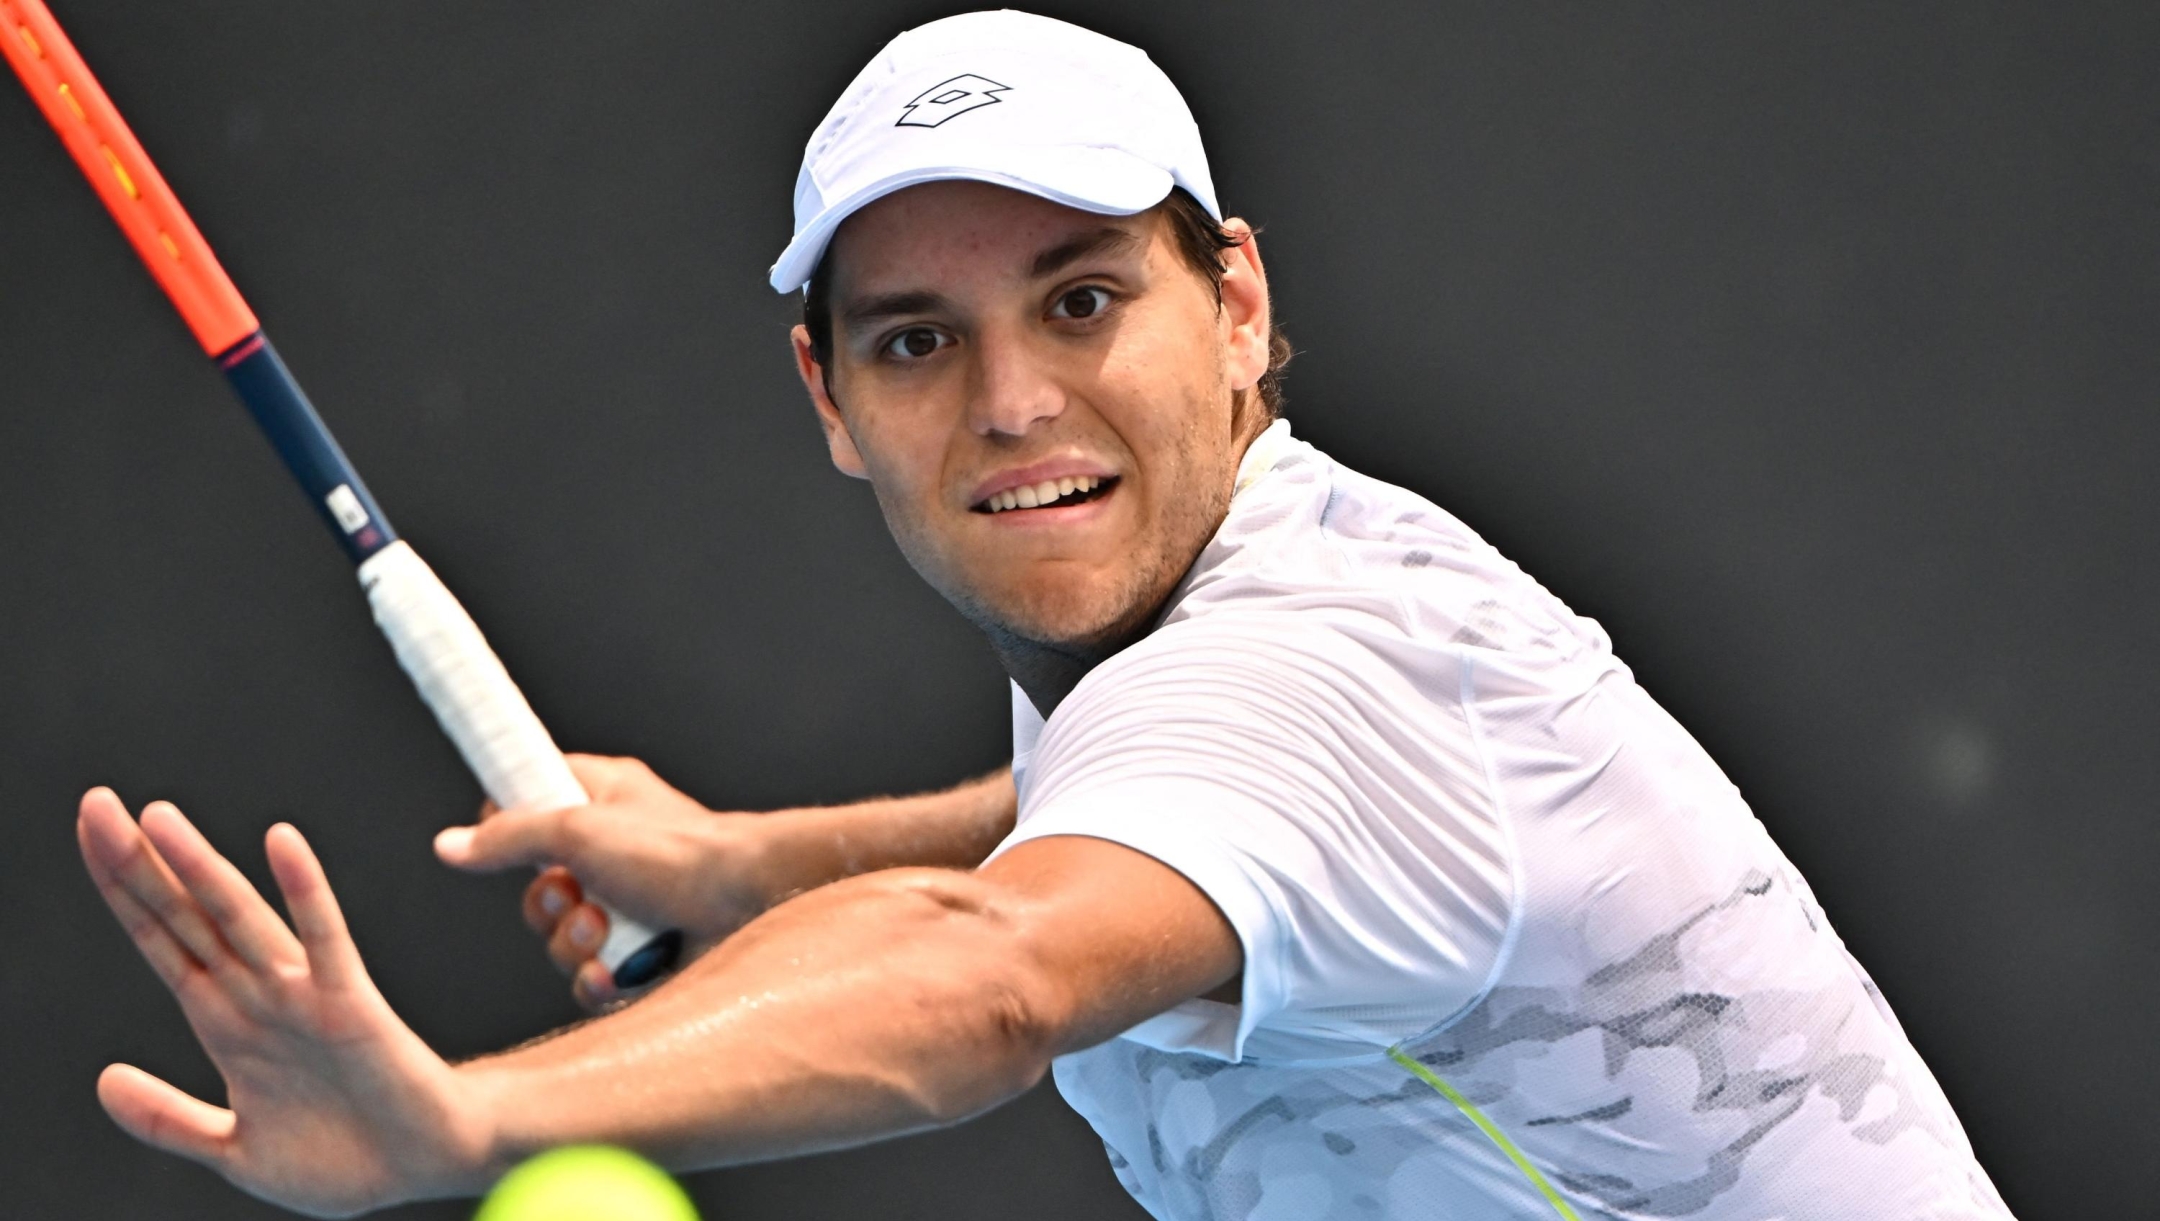 Russia's Pavel Kotov hits a return against France's Arthur Rinderknech during their men's singles match on day one of the Australian Open tennis tournament in Melbourne on January 14, 2024. (Photo by Lillian SUWANRUMPHA / AFP) / -- IMAGE RESTRICTED TO EDITORIAL USE - STRICTLY NO COMMERCIAL USE --